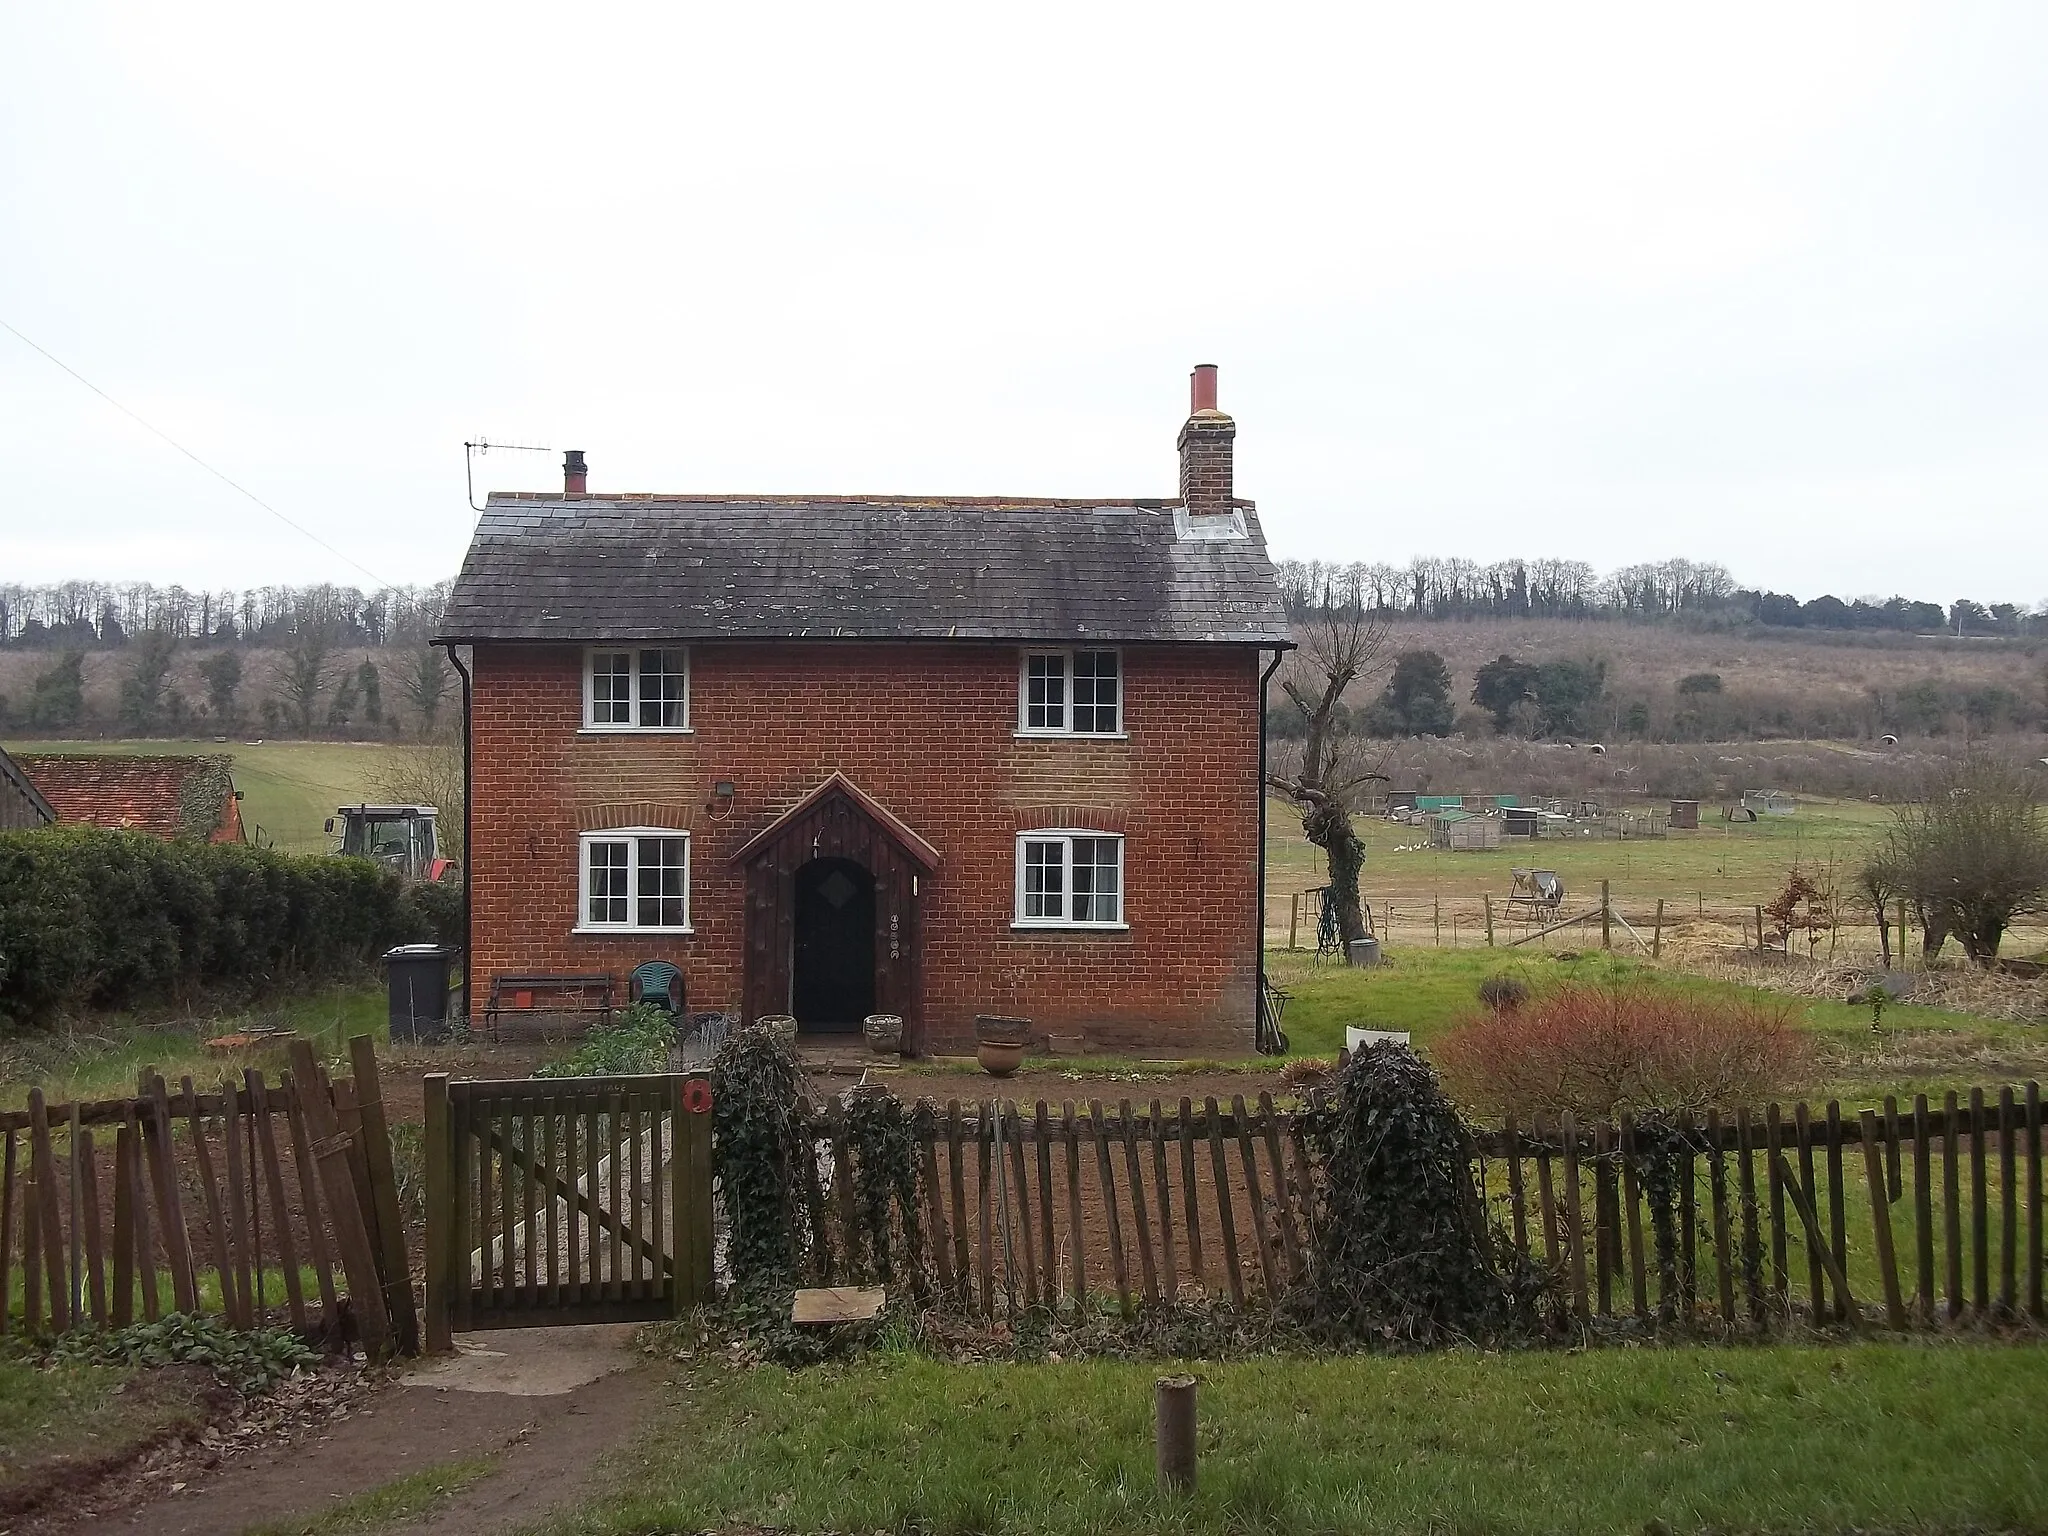 Photo showing: House at Clear Barn, Puttenham. Looking north with the Hog's Back behind. Surrey, England.